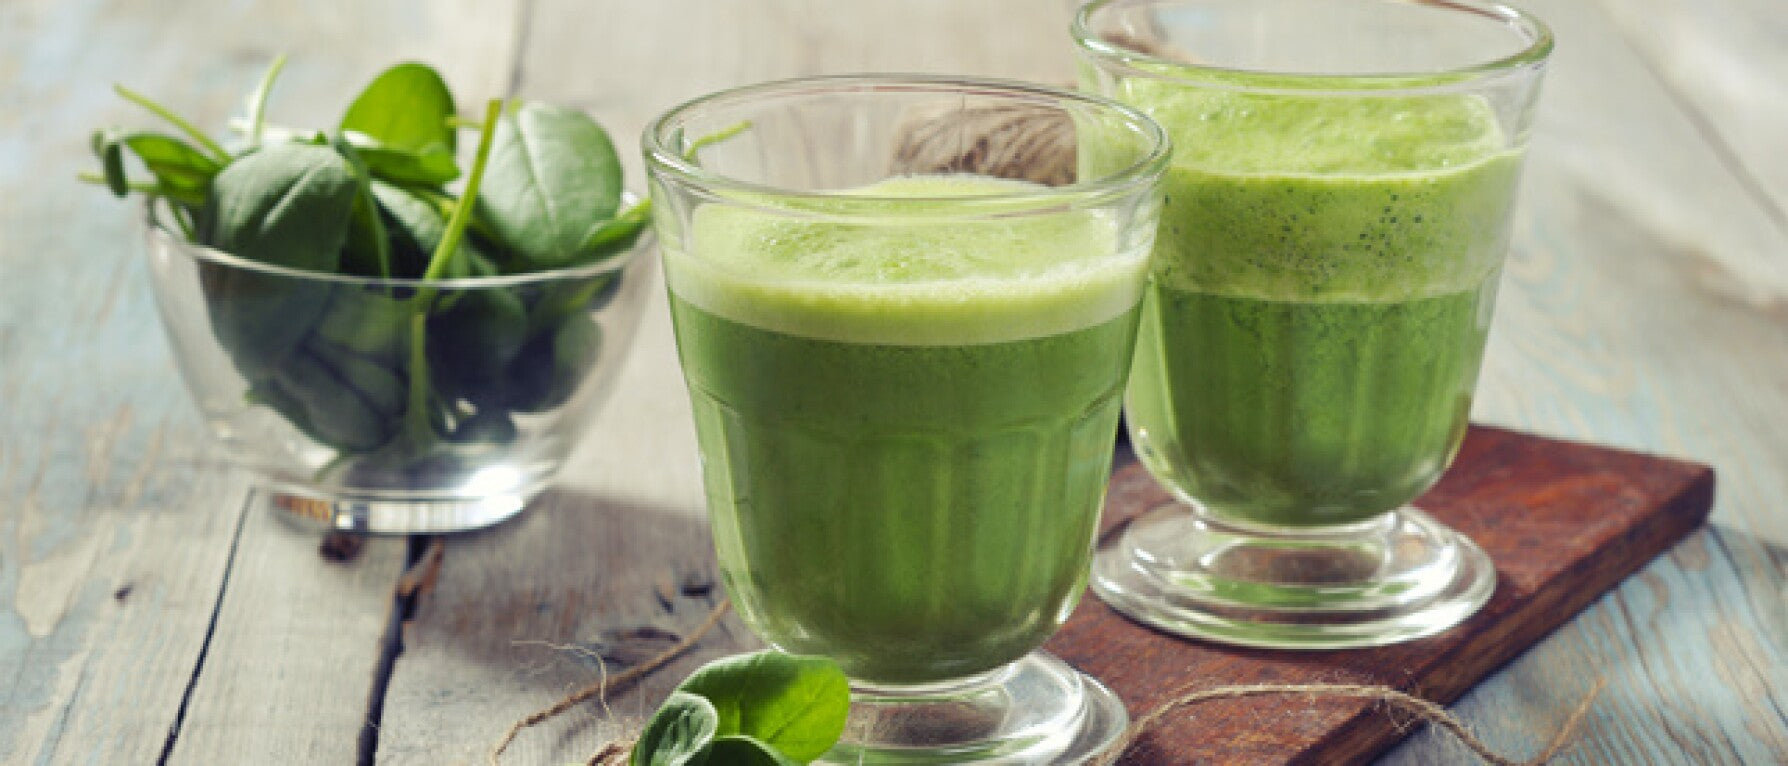 One Week Juice Cleanse and its Benefits - Yogic Way of Life